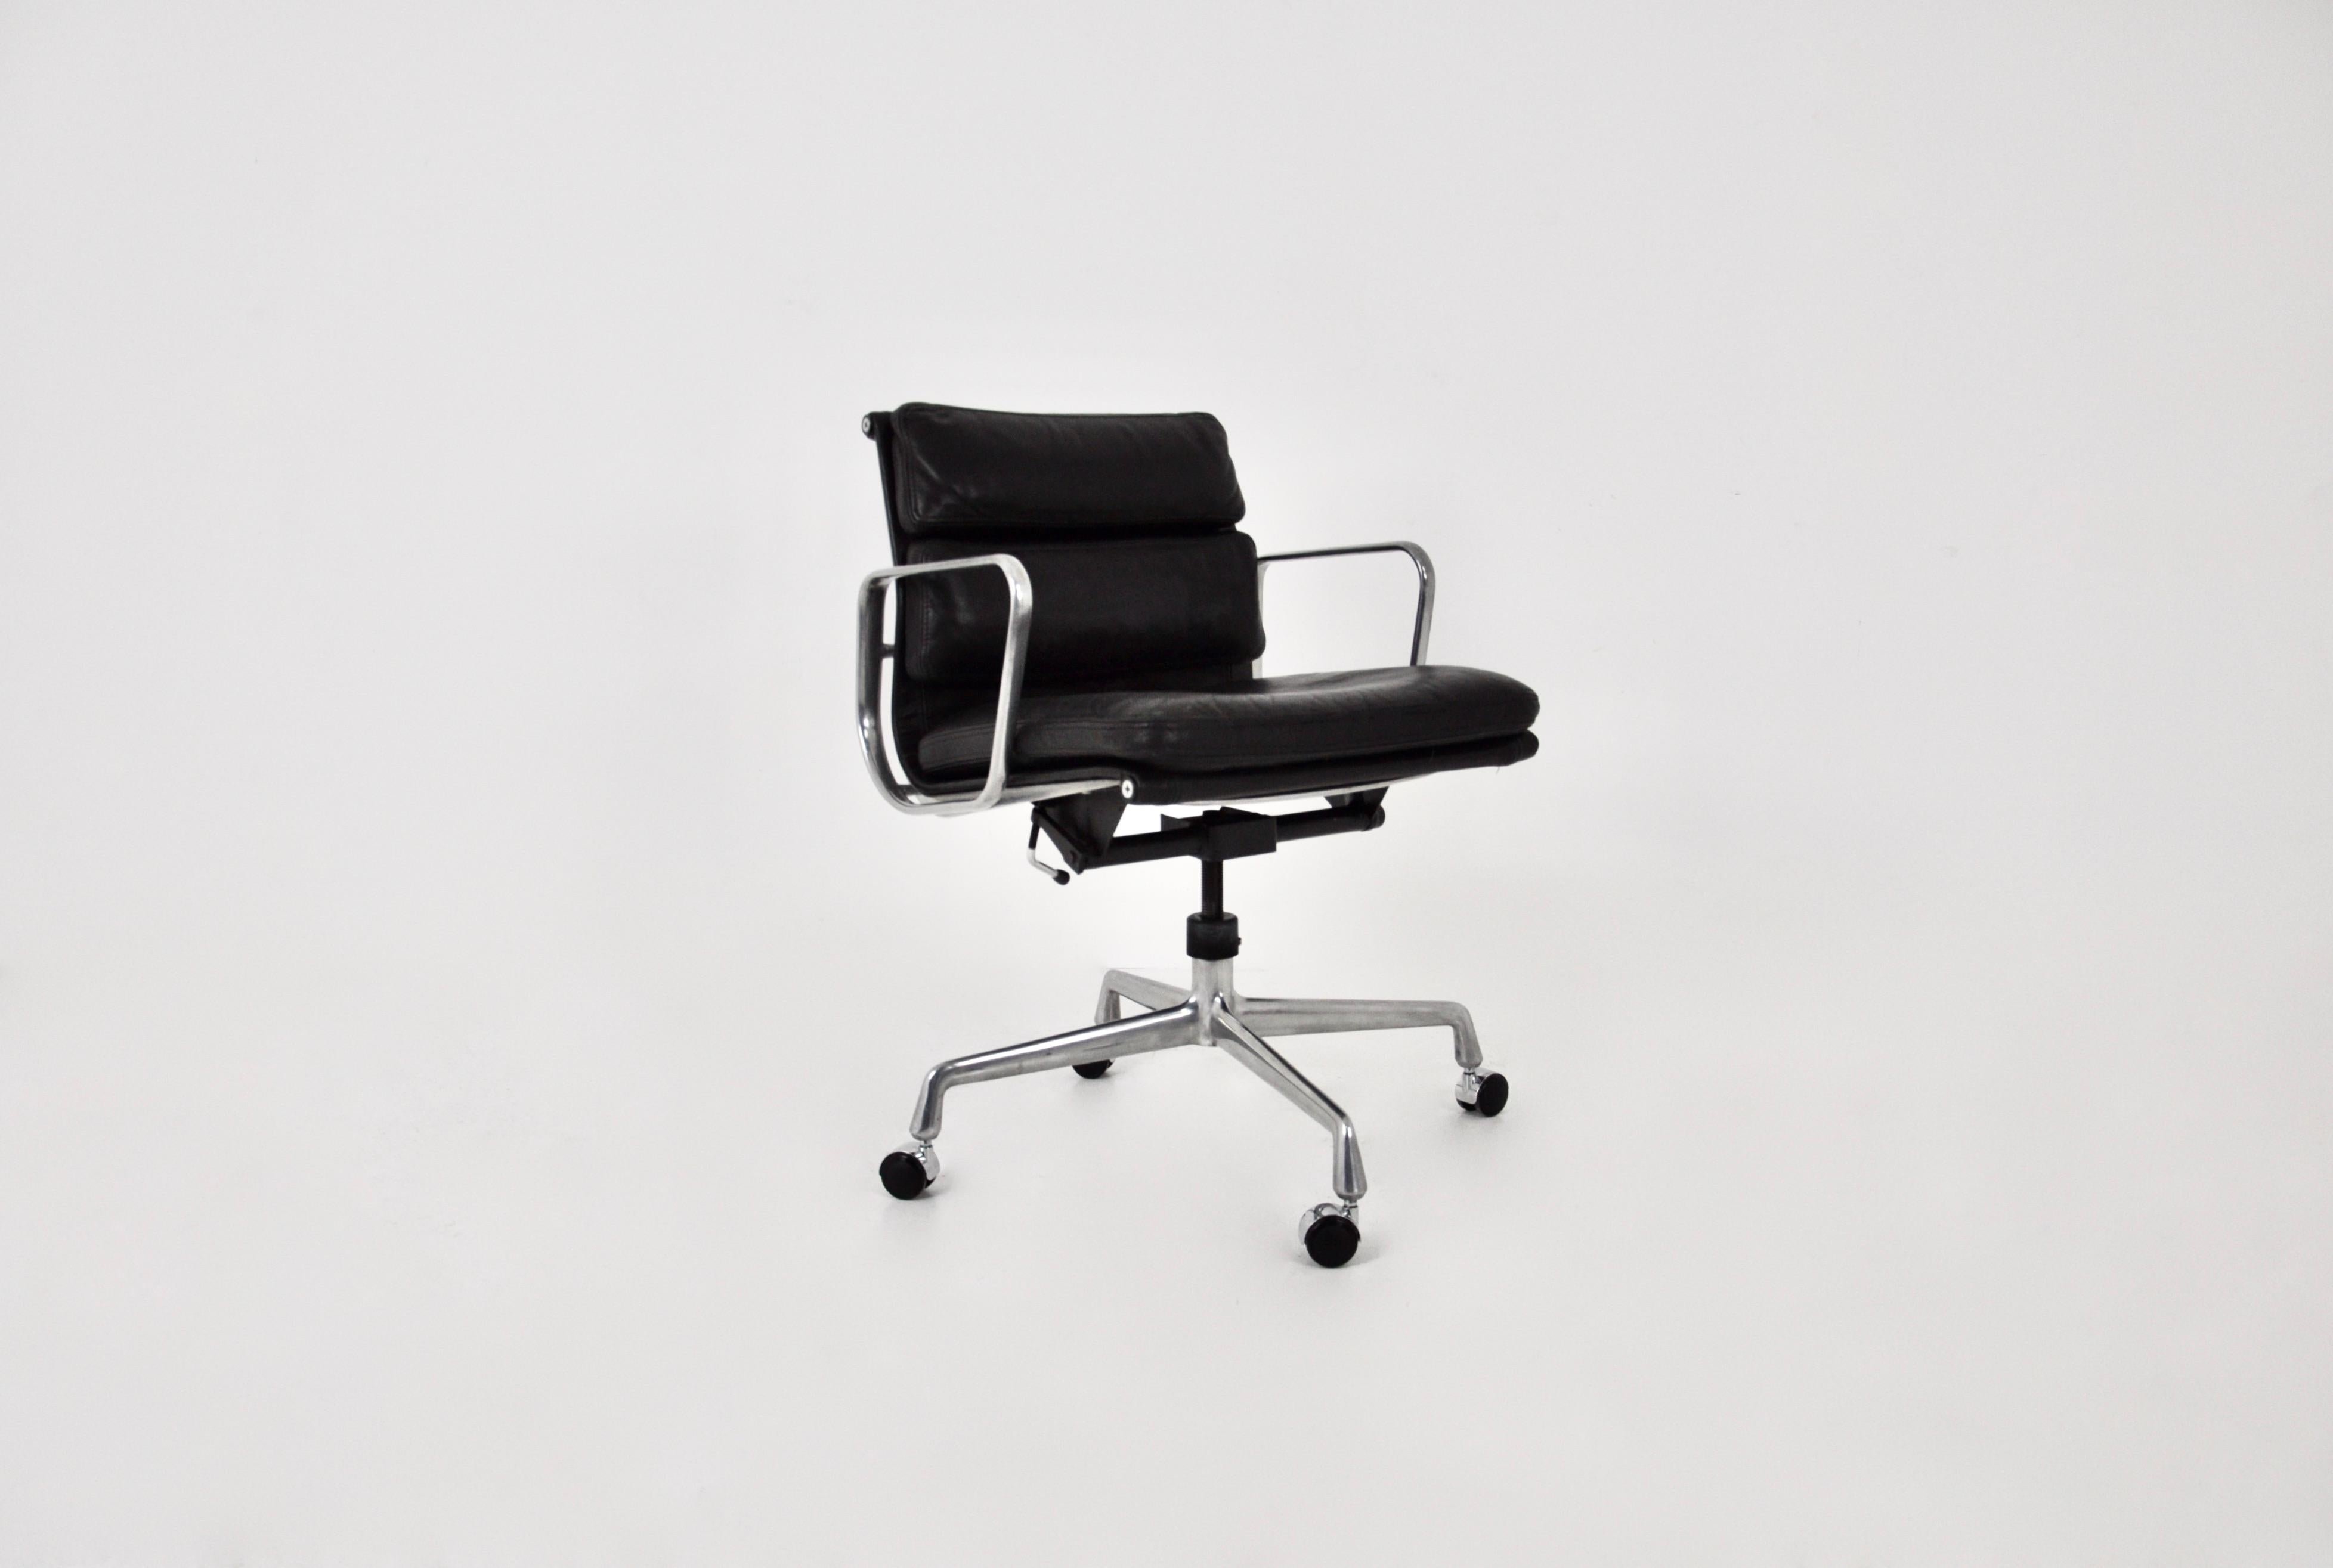 Black leather armchair with aluminium base and wheels. Turns on itself. Dimensions: Seat height 53cm. Stamped Ring Mobelfabrikk Norway. Wear due to time and age of the chair.